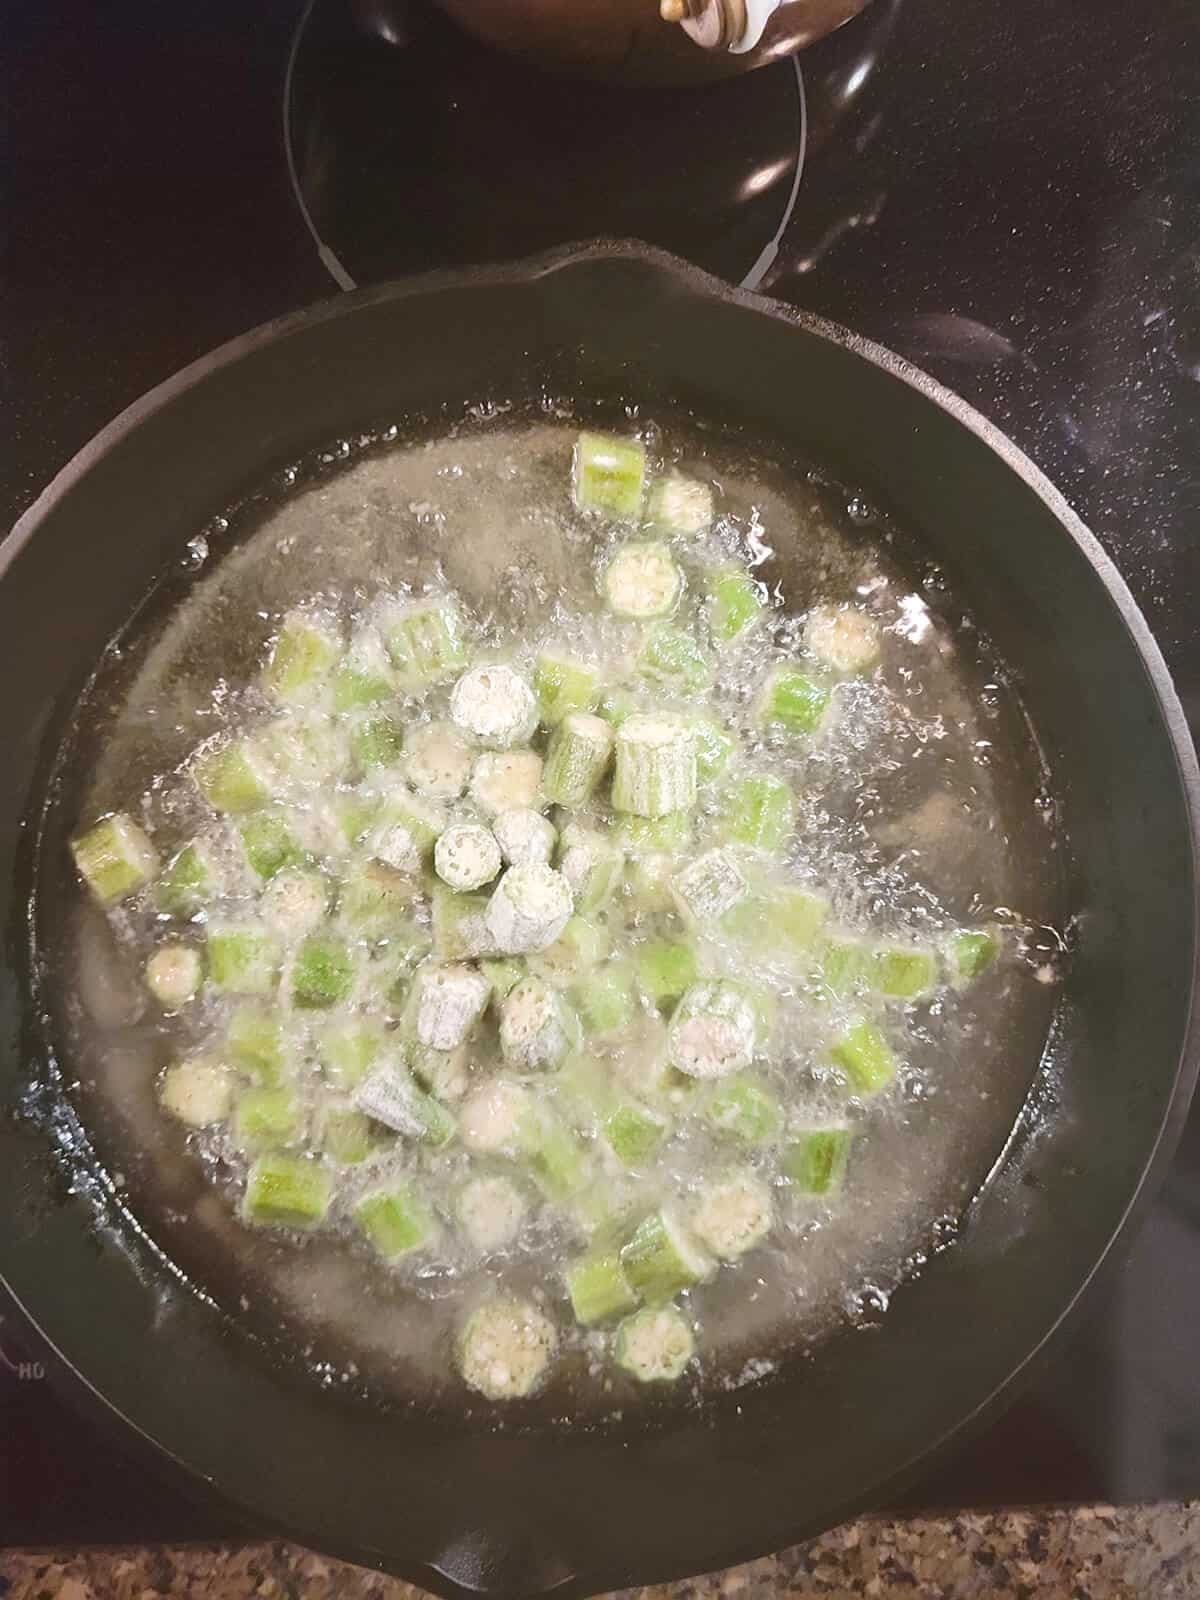 Okra added to the hot oil in a frying pan.